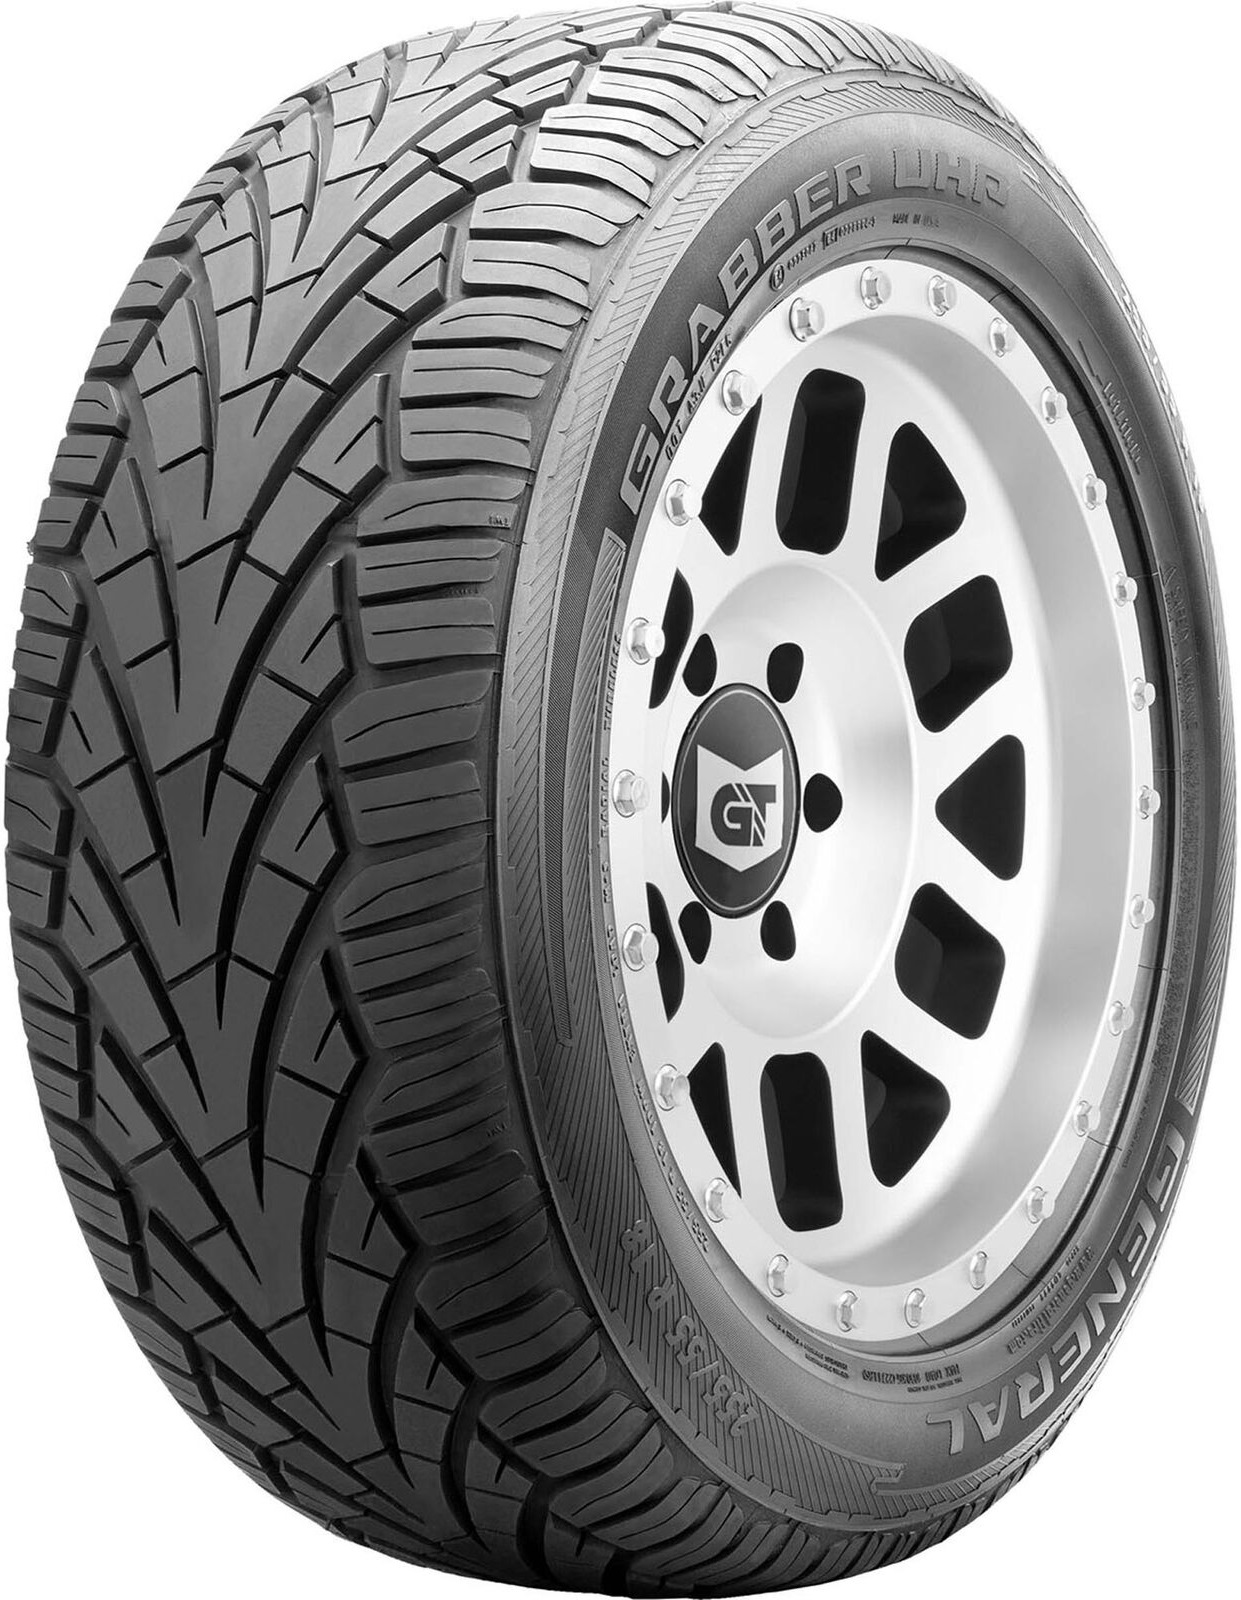 GENERAL TIRE GRABBER UHP 255/55 R 16 103T